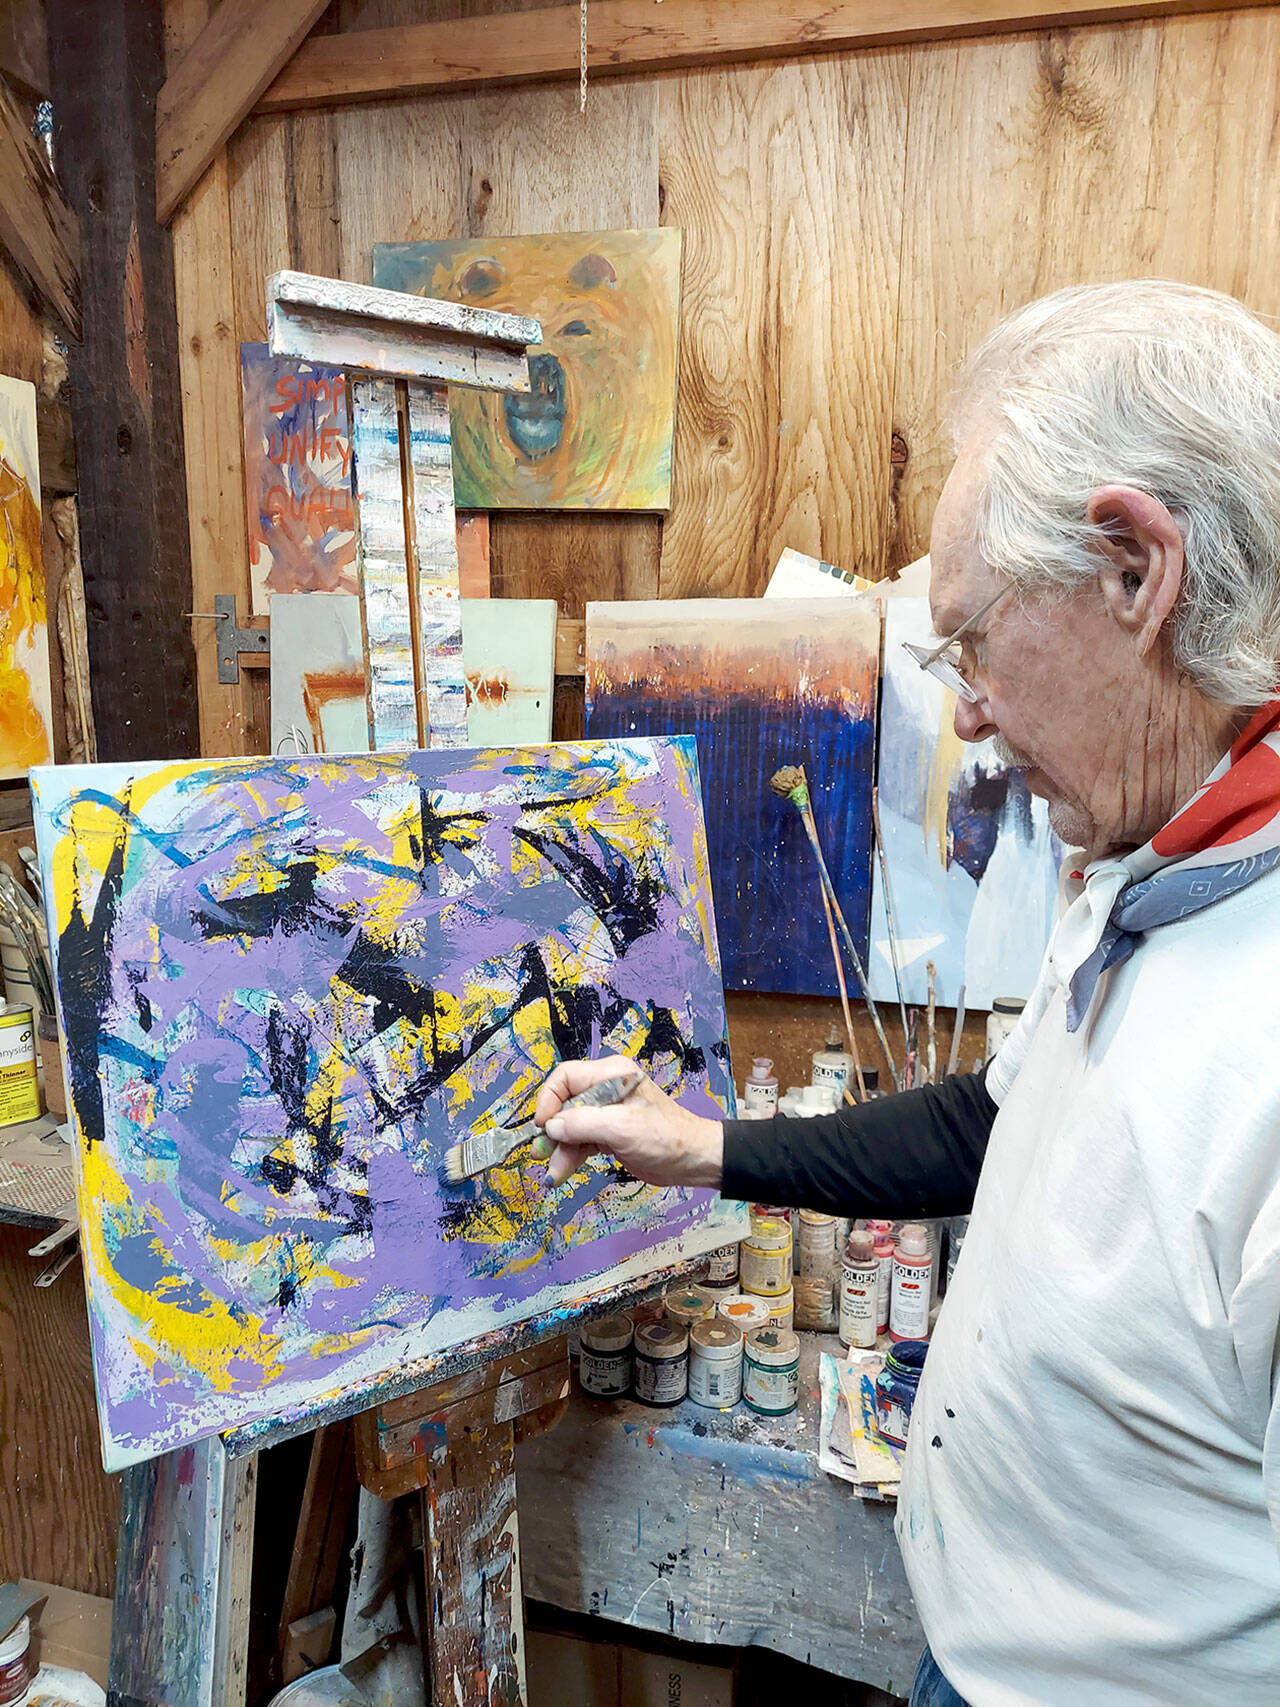 Terry Grasteit will demonstrate his painting style and technique from 1 p.m. to 3 p.m. Saturday.